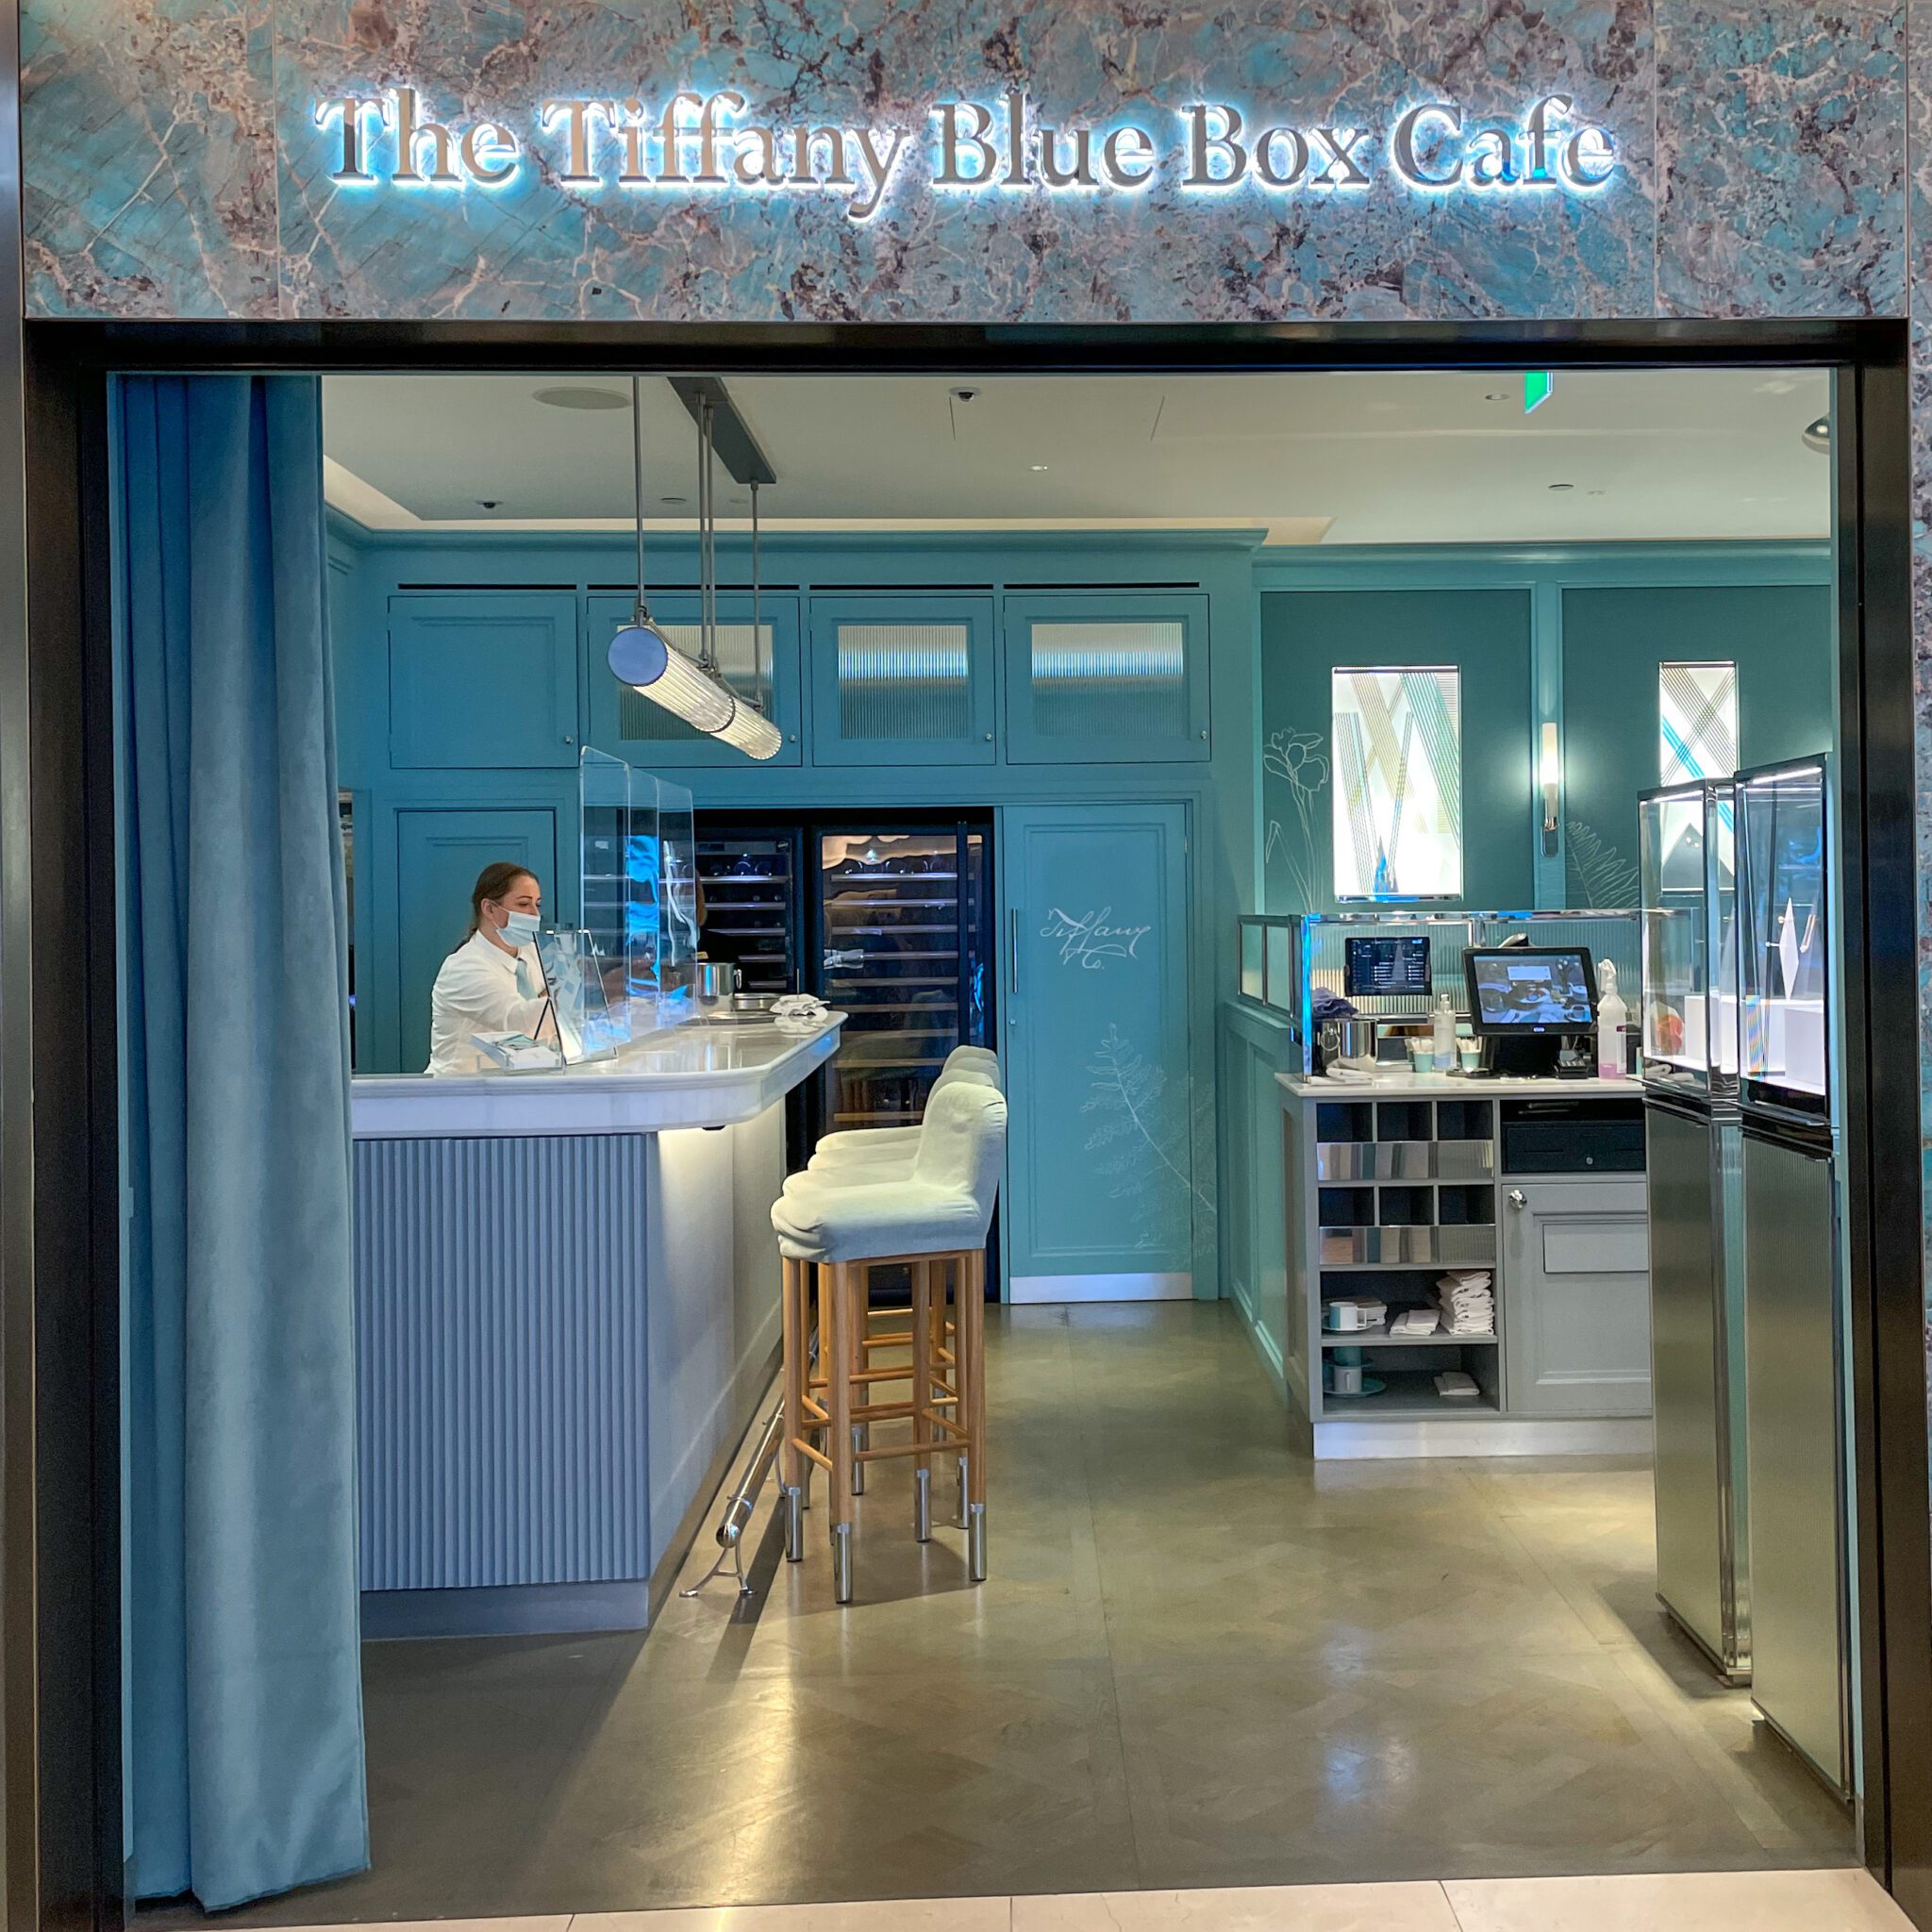 Breakfast at Tiffany's - Blue Box Cafe NYC Vlog and Review 